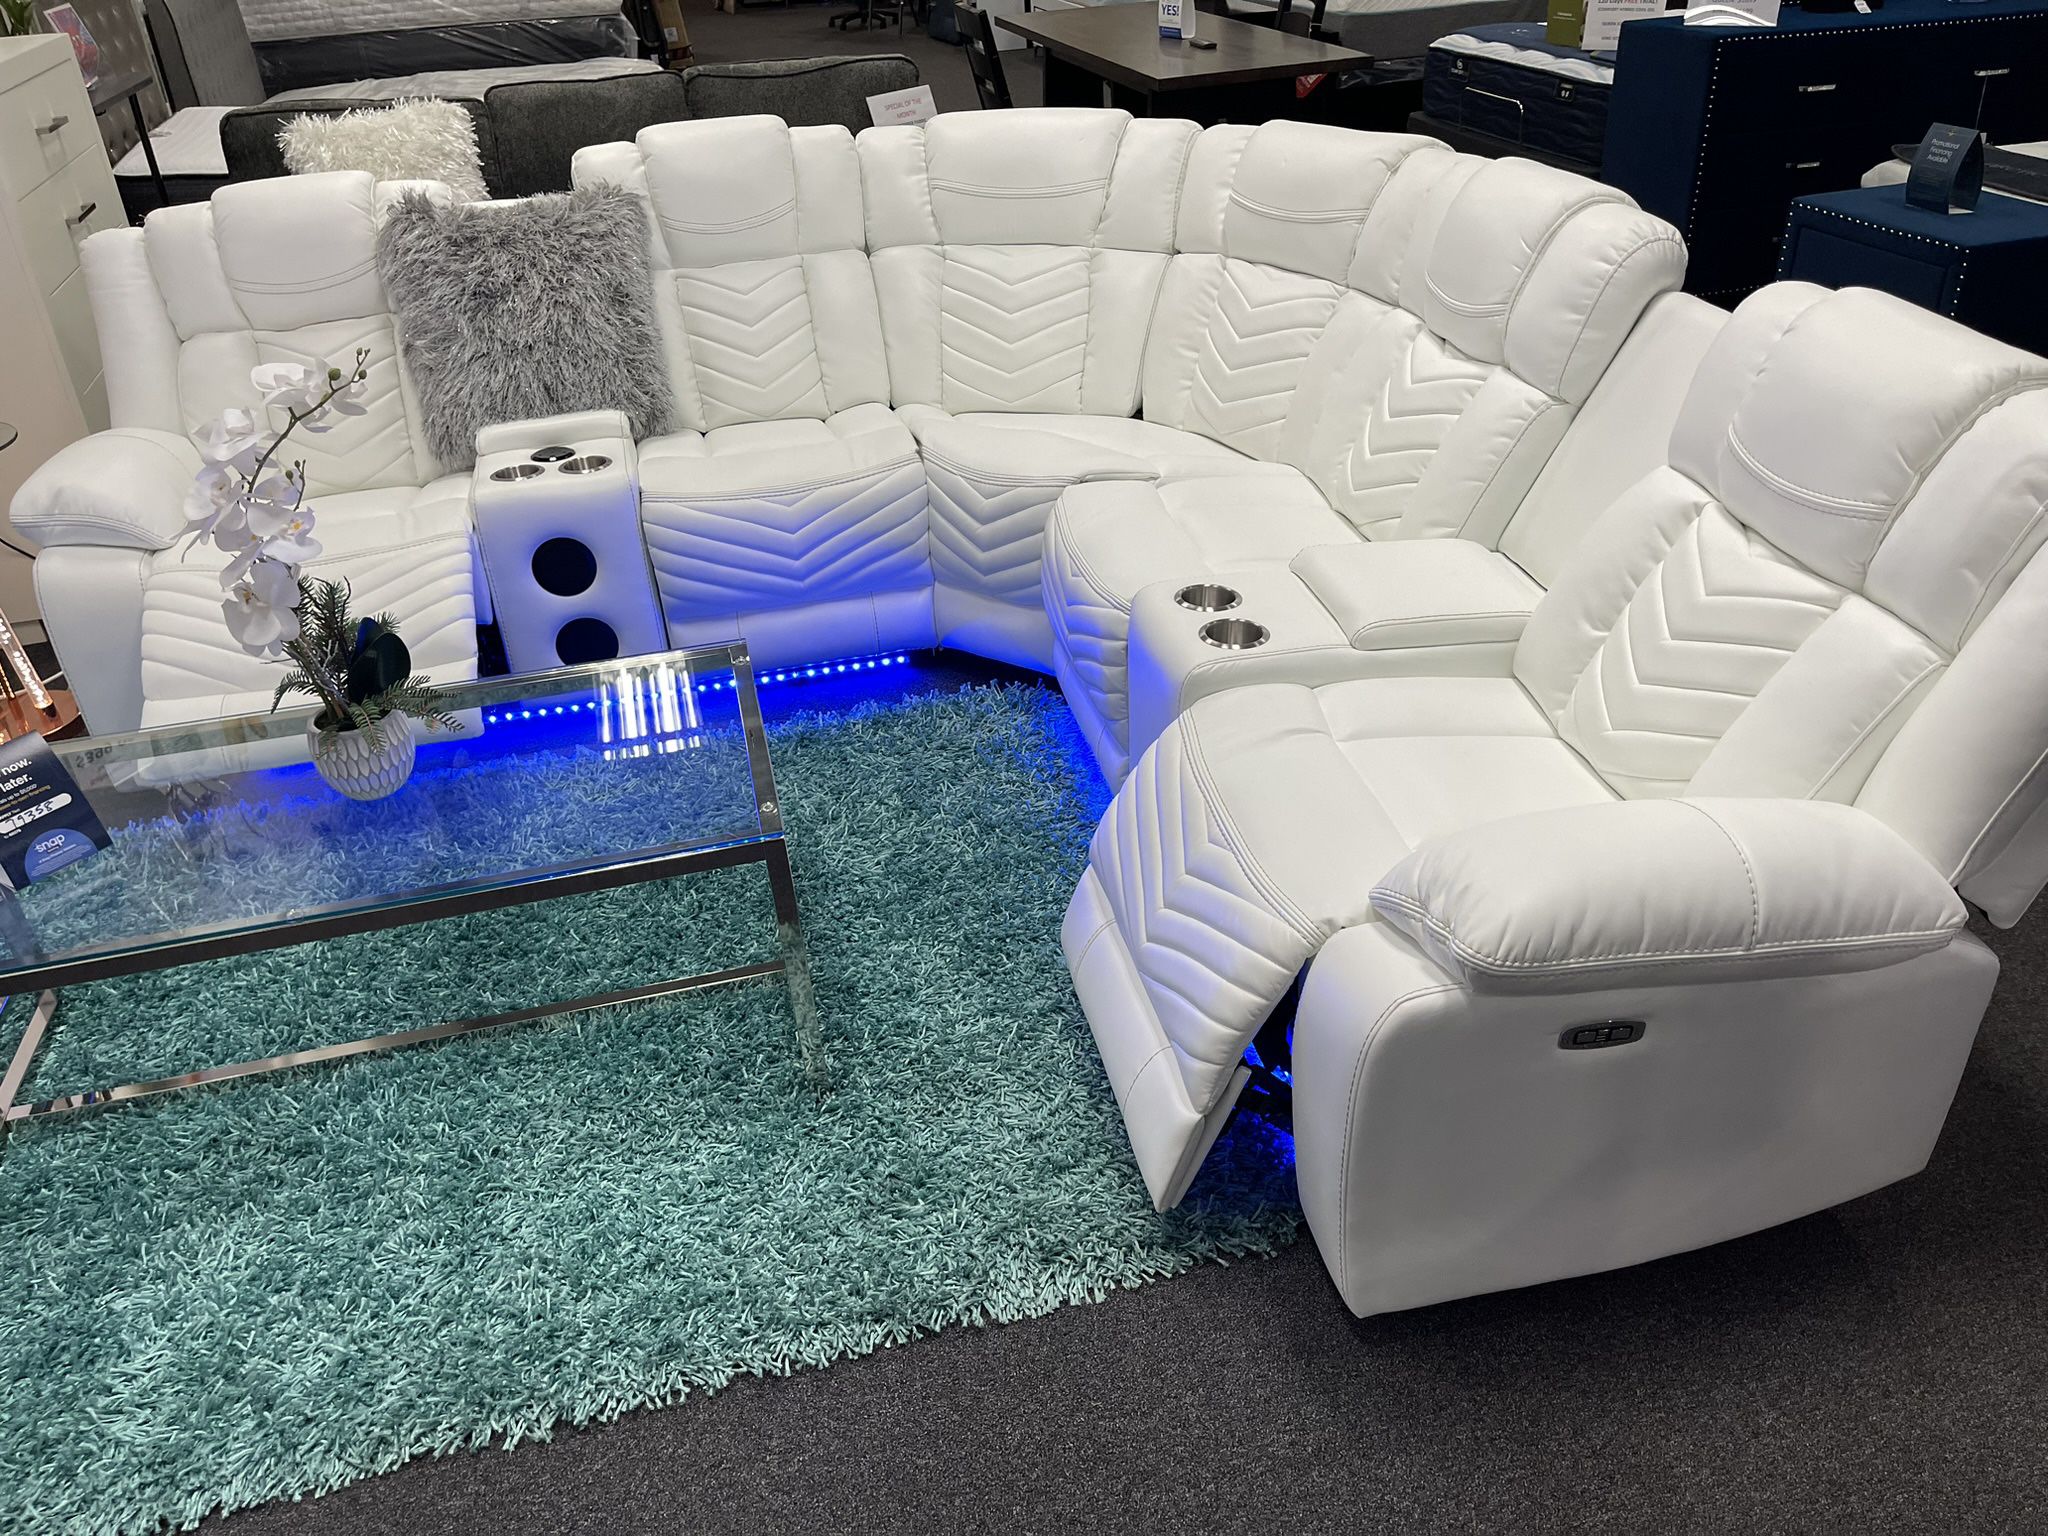 🔥🔥TAKE IT HOME with $40 down No Credit Needed 🔥‼️POWER MOTION SOFA RECLINERS,Bluetooth Speaker and Console🛋️‼️